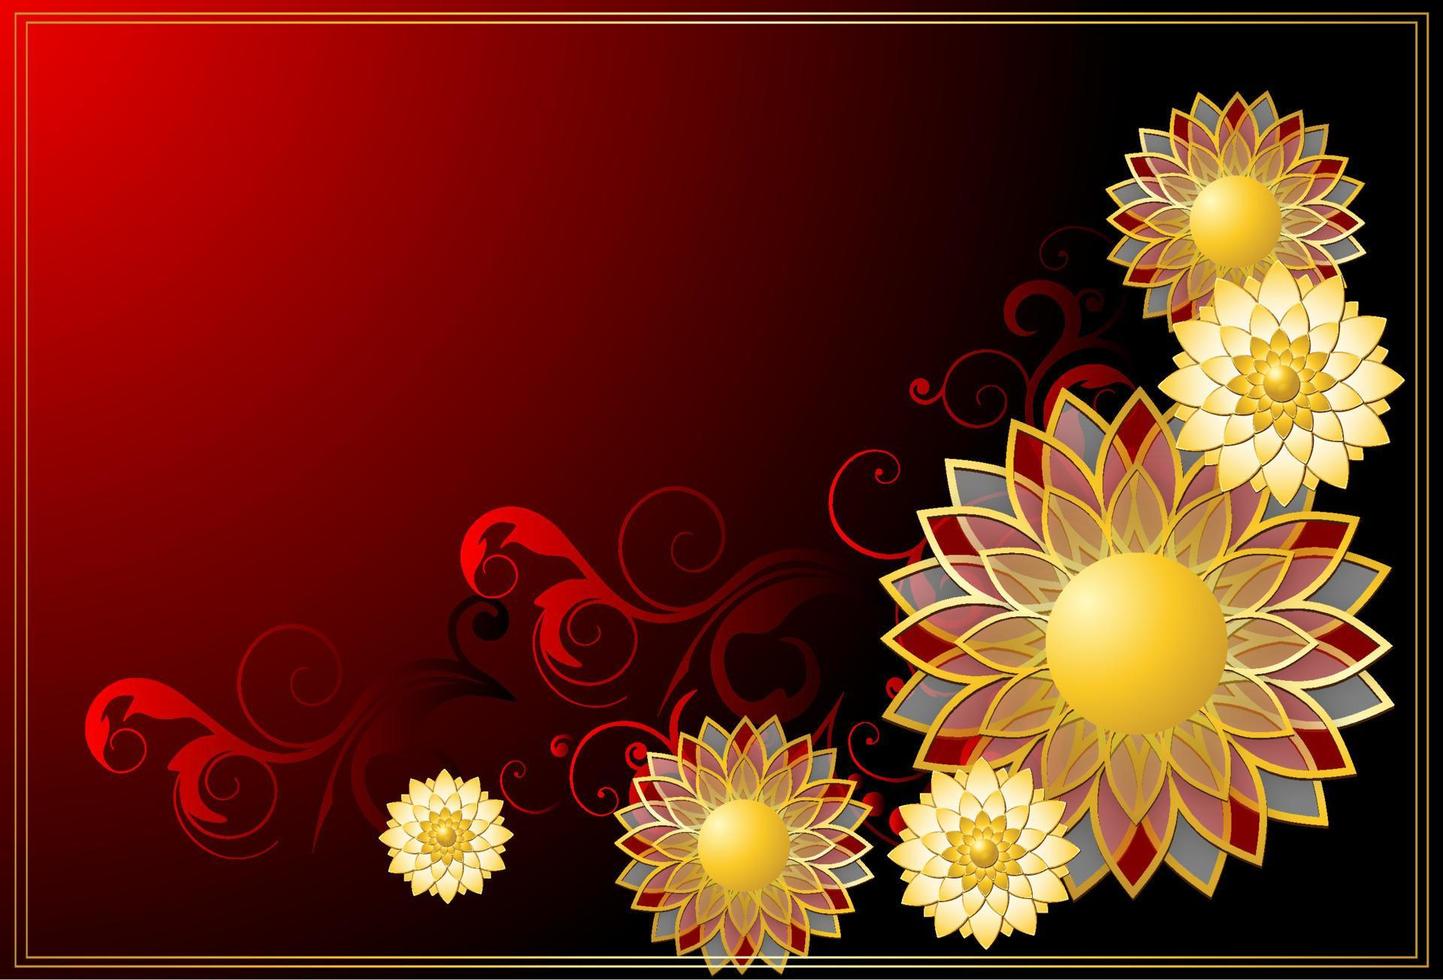 Vintage red frame with gold flowers vector